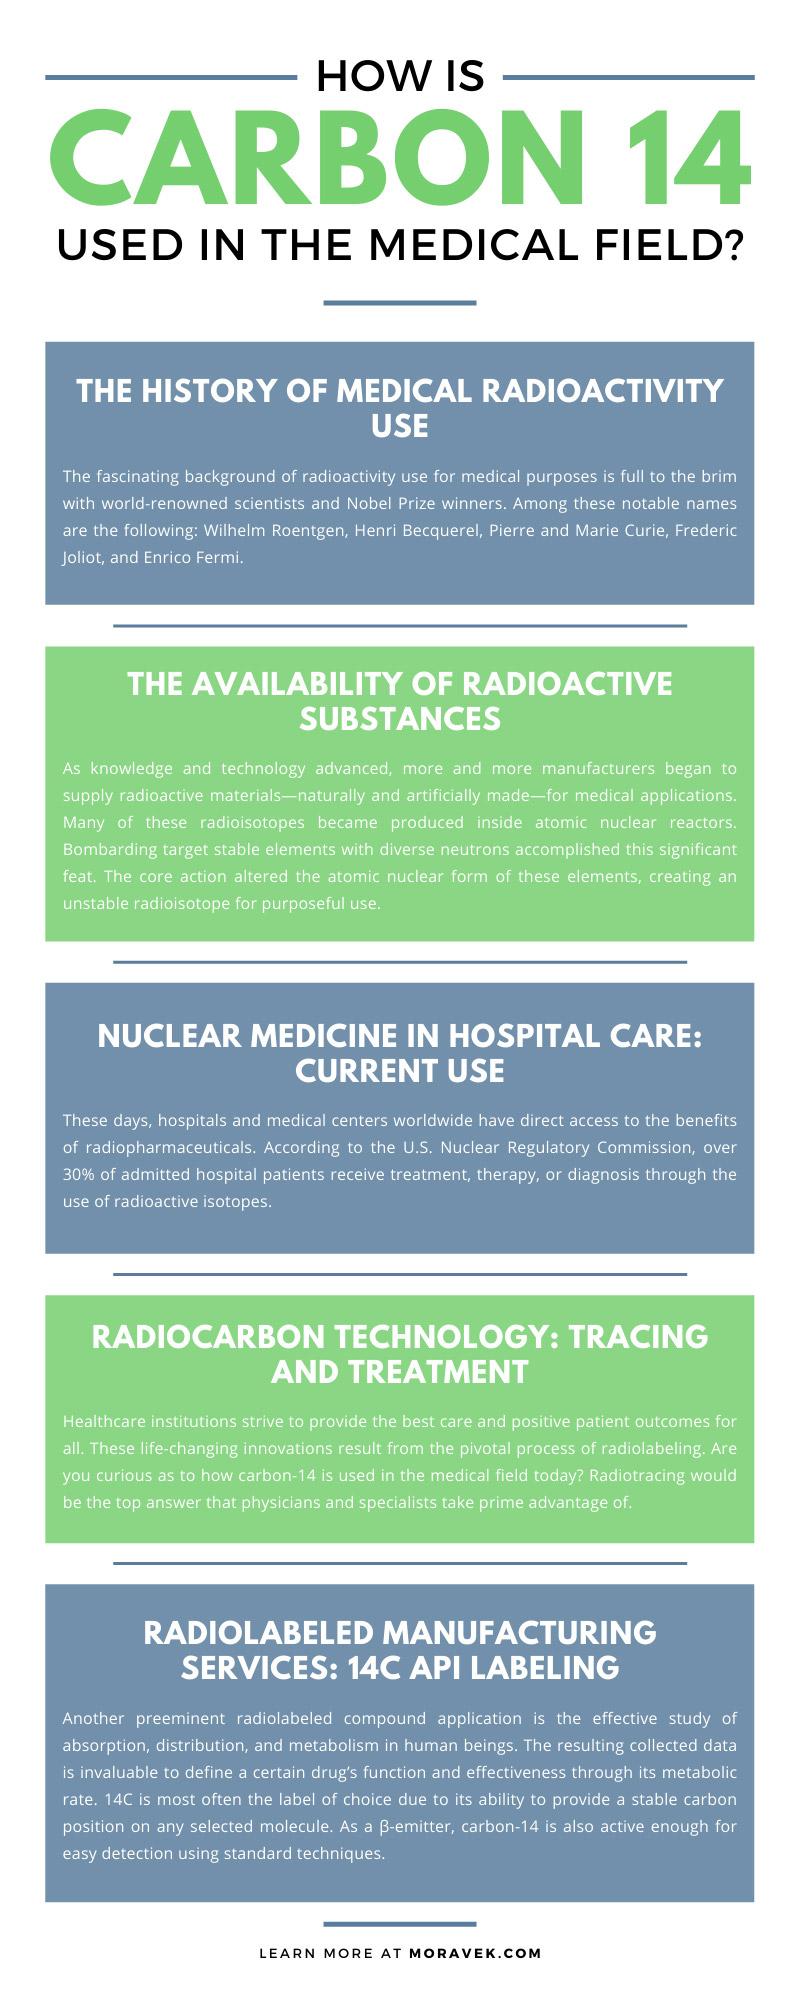 How Is Carbon 14 Used in the Medical Field?